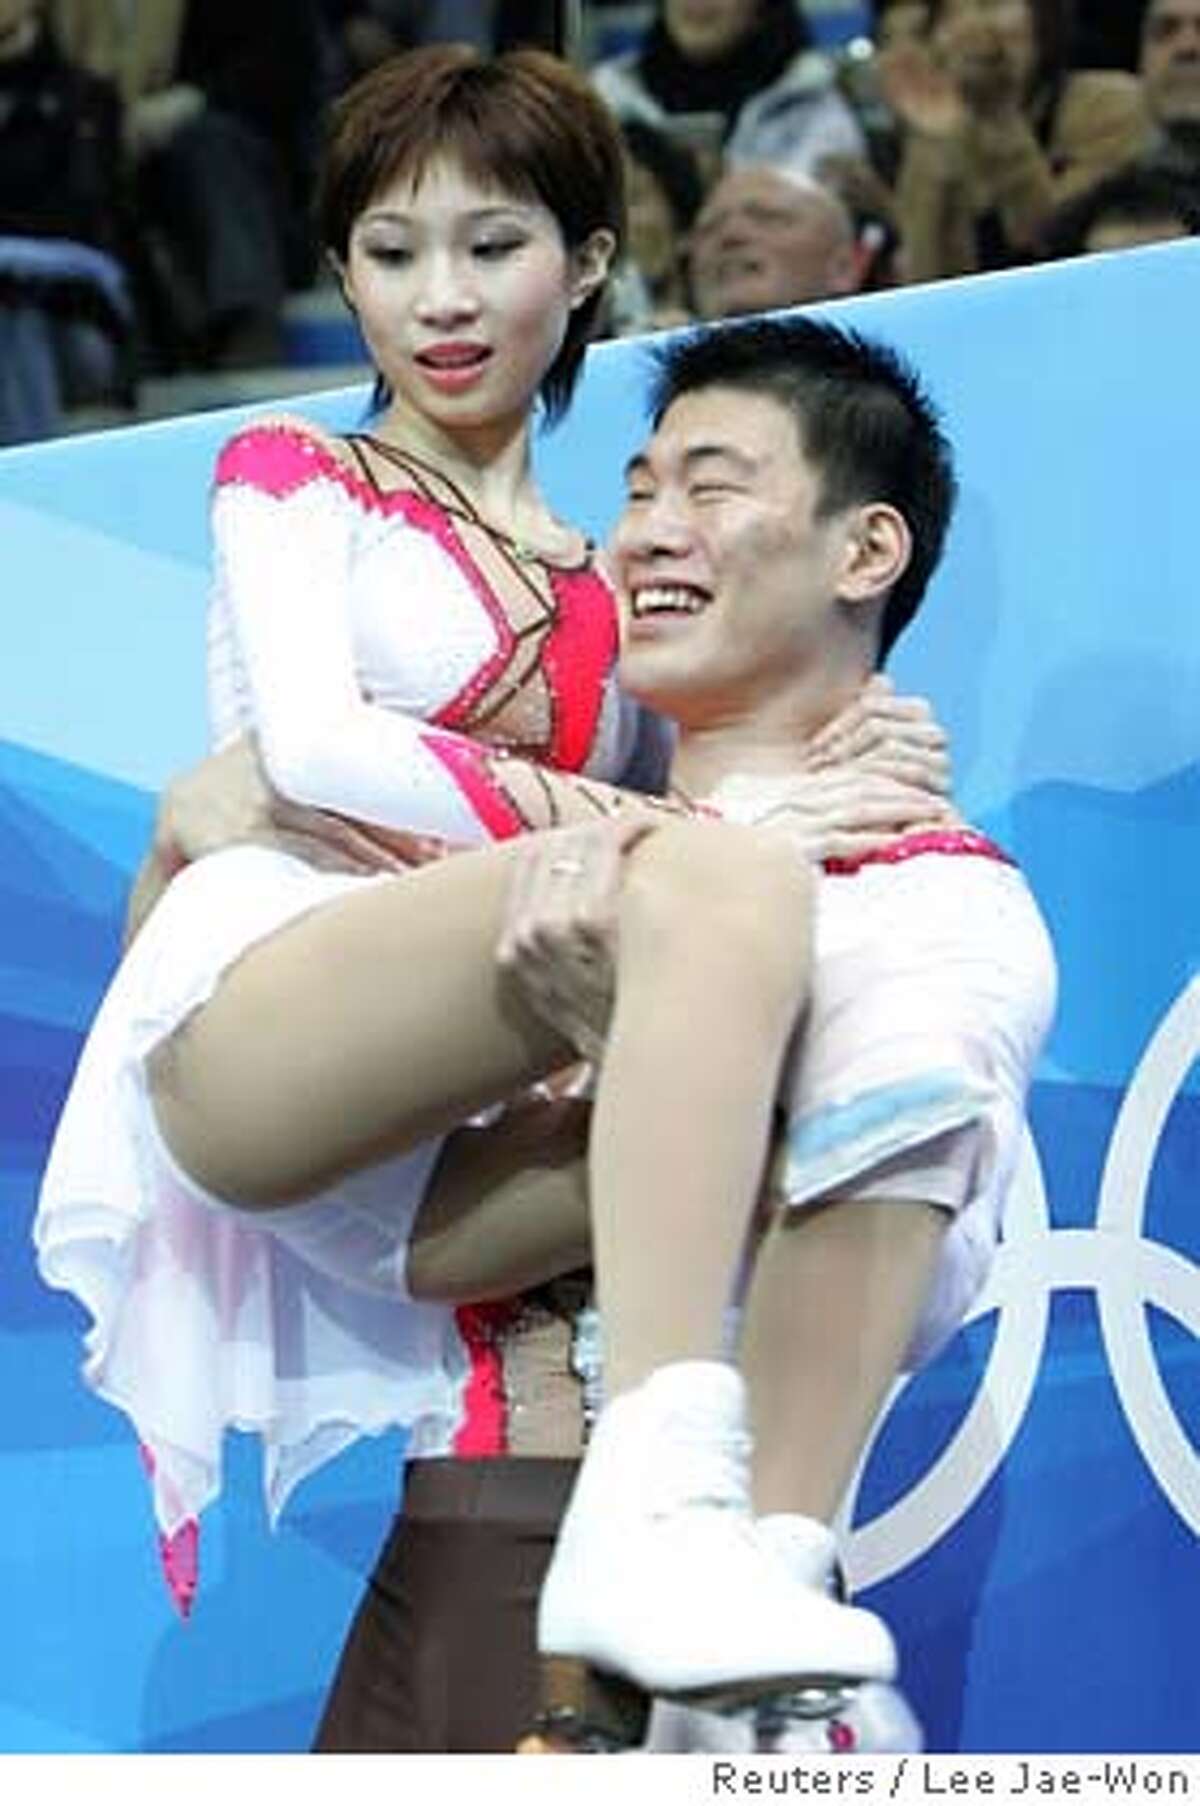 Zhang Dan is carried by Zhang Hao from China after winning the silver medal in figure skating Pairs Free Skating at the Torino 2006 Winter Olympic Games in Turin, Italy February 13, 2006. Dan fell and injured her leg. REUTERS/Lee Jae-Won 0